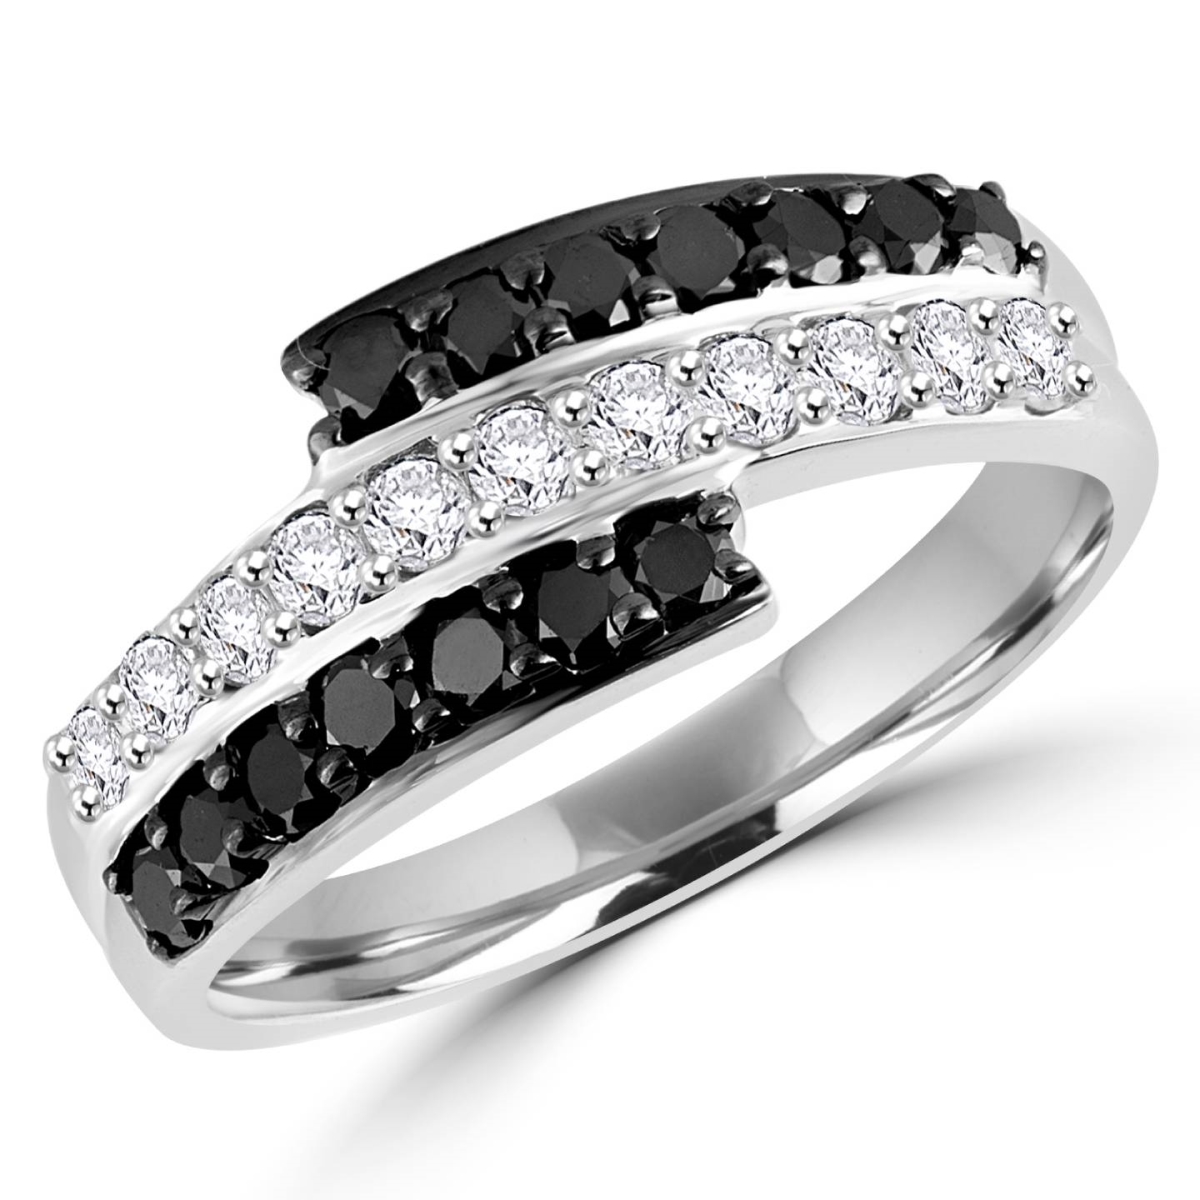 Picture of Majesty Diamonds MDR140130-9 0.75 CTW Black & White Round Diamond Fashion Cocktail Ring in 14K White Gold - Size 9